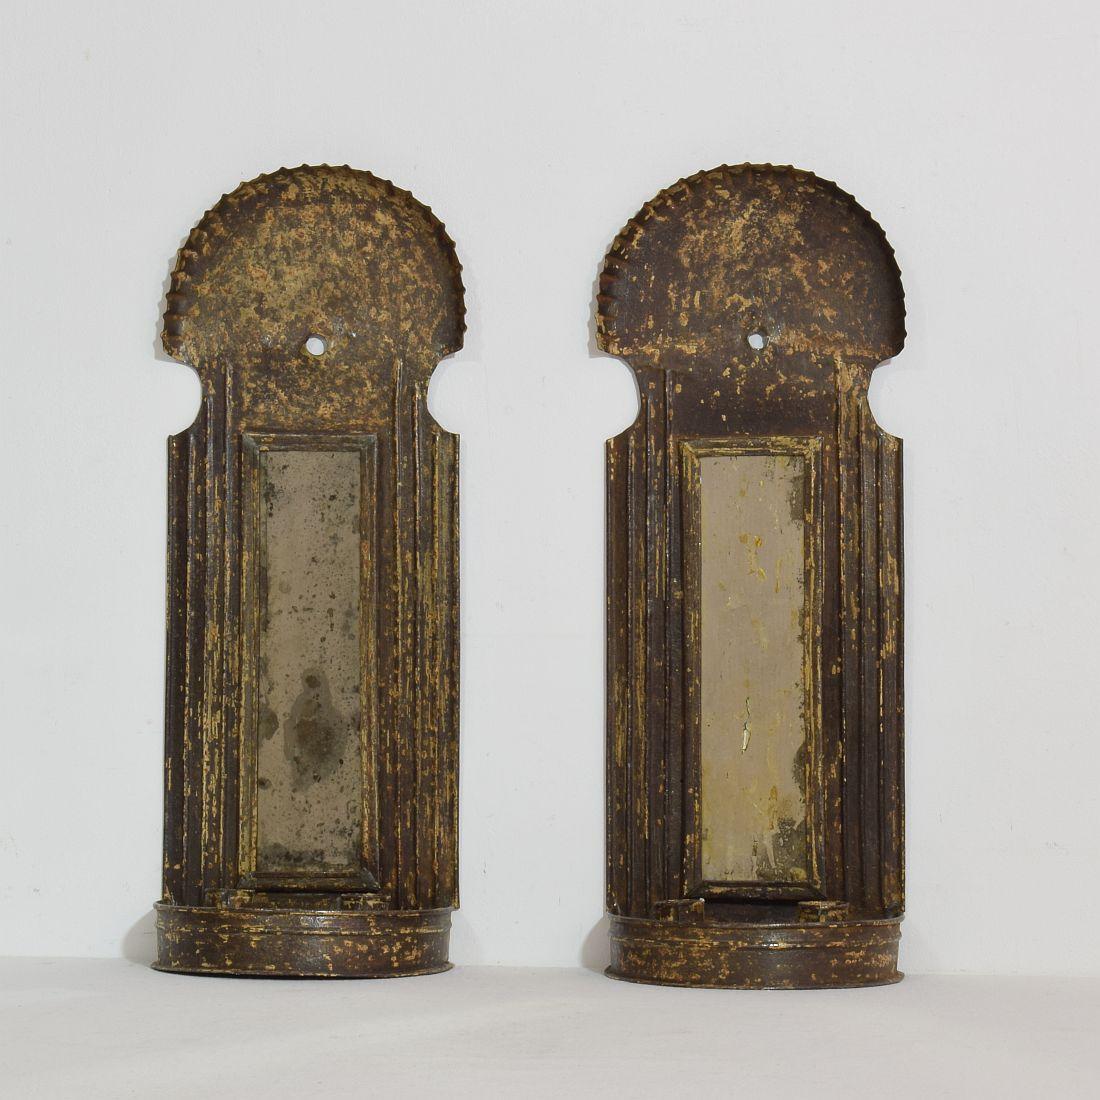 Unique pair of iron wall candleholders with small mirrors that reflect the light.
France circa 1750-1800
Weathered, small losses.